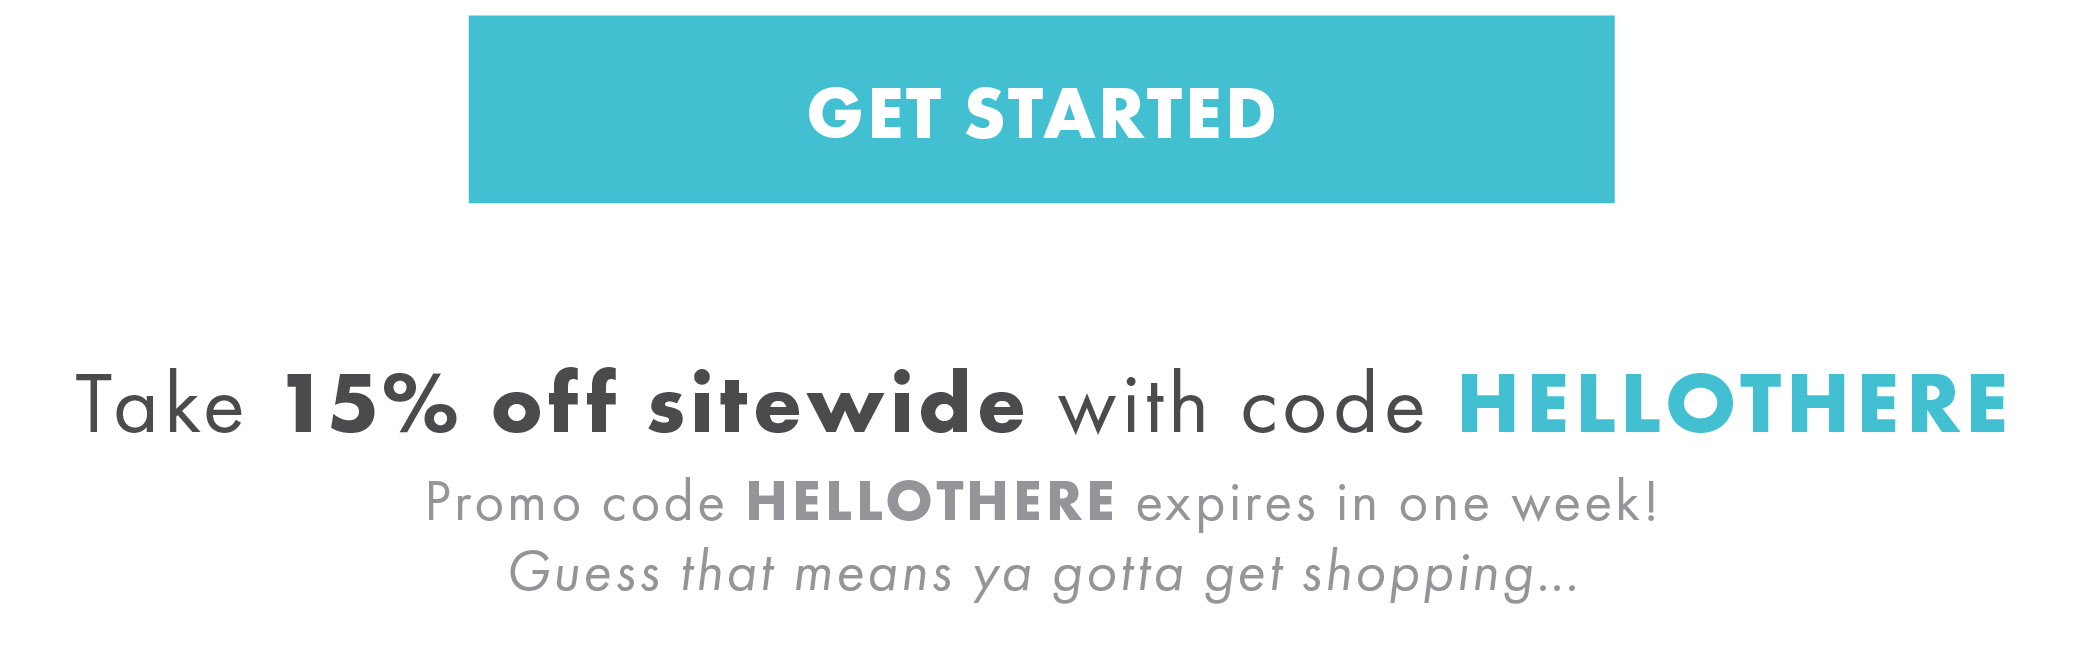 GET STARTED - Take 15% off sitewide with code HELLOTHERE - Promo code HELLOTHERE expires in one week! Guess that means ya gotta get shopping. 